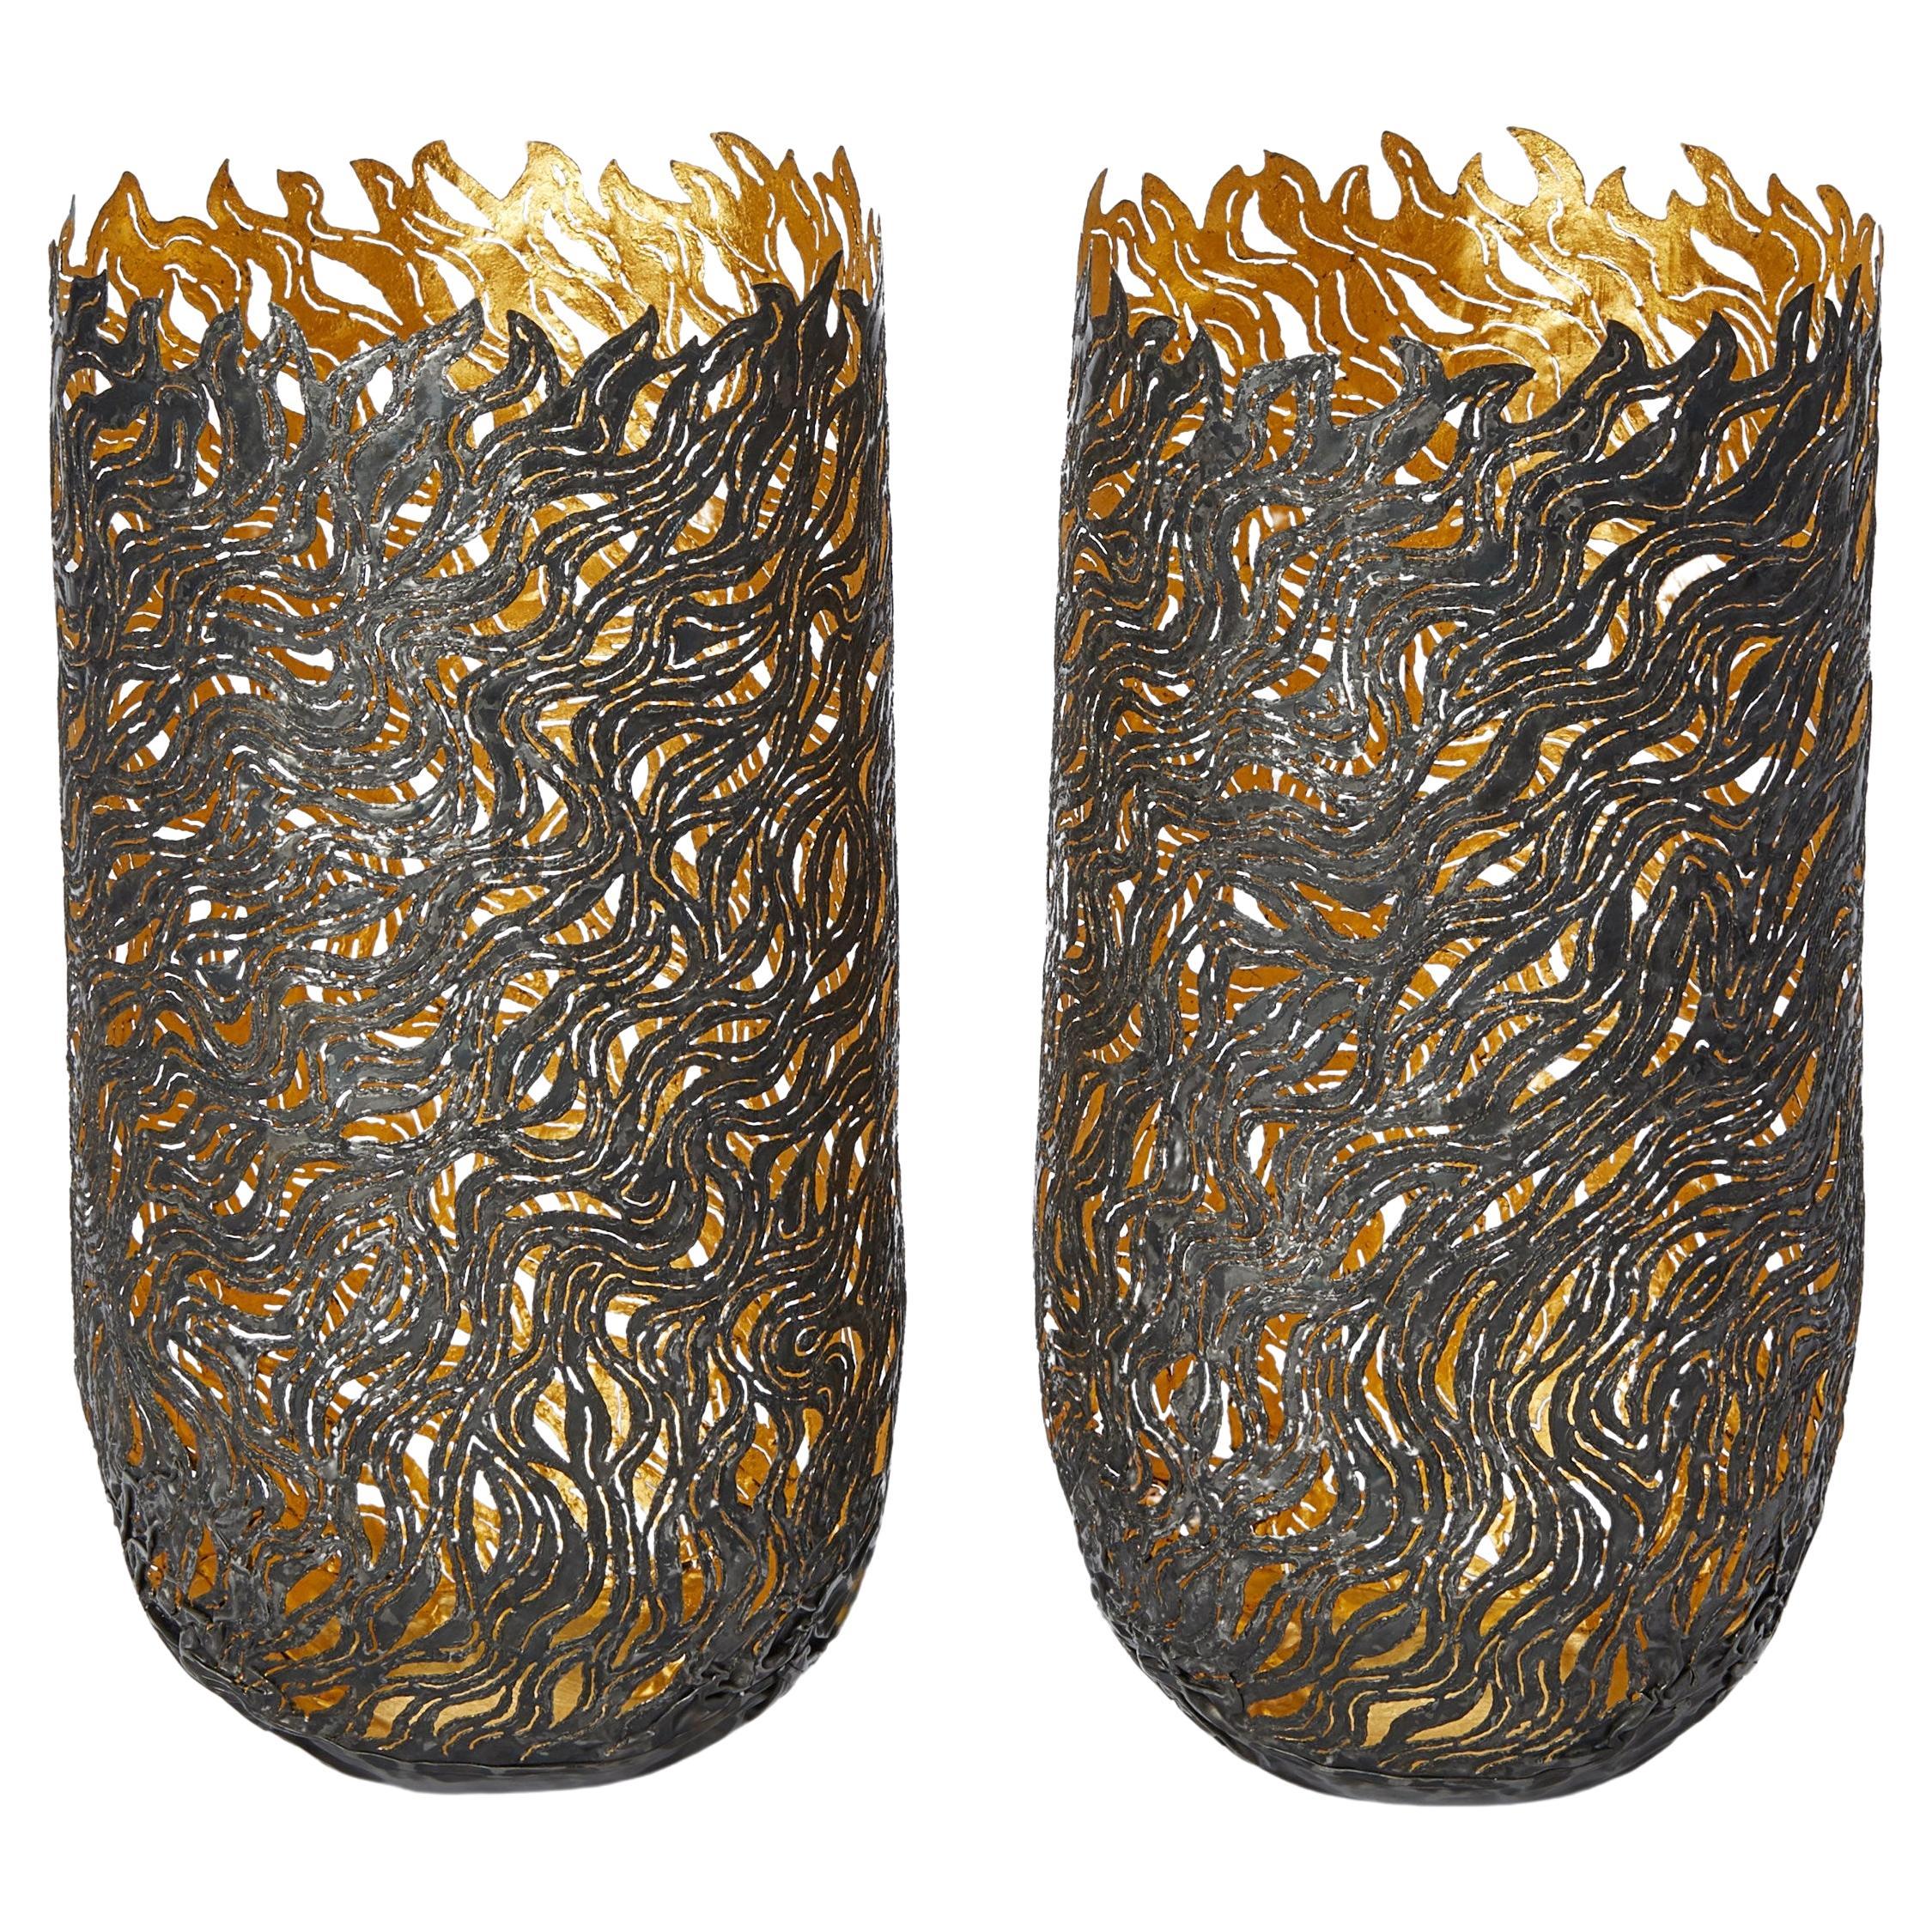  Autumn Dance Vessels, organic textured steel & gold vessels by Claire Malet For Sale